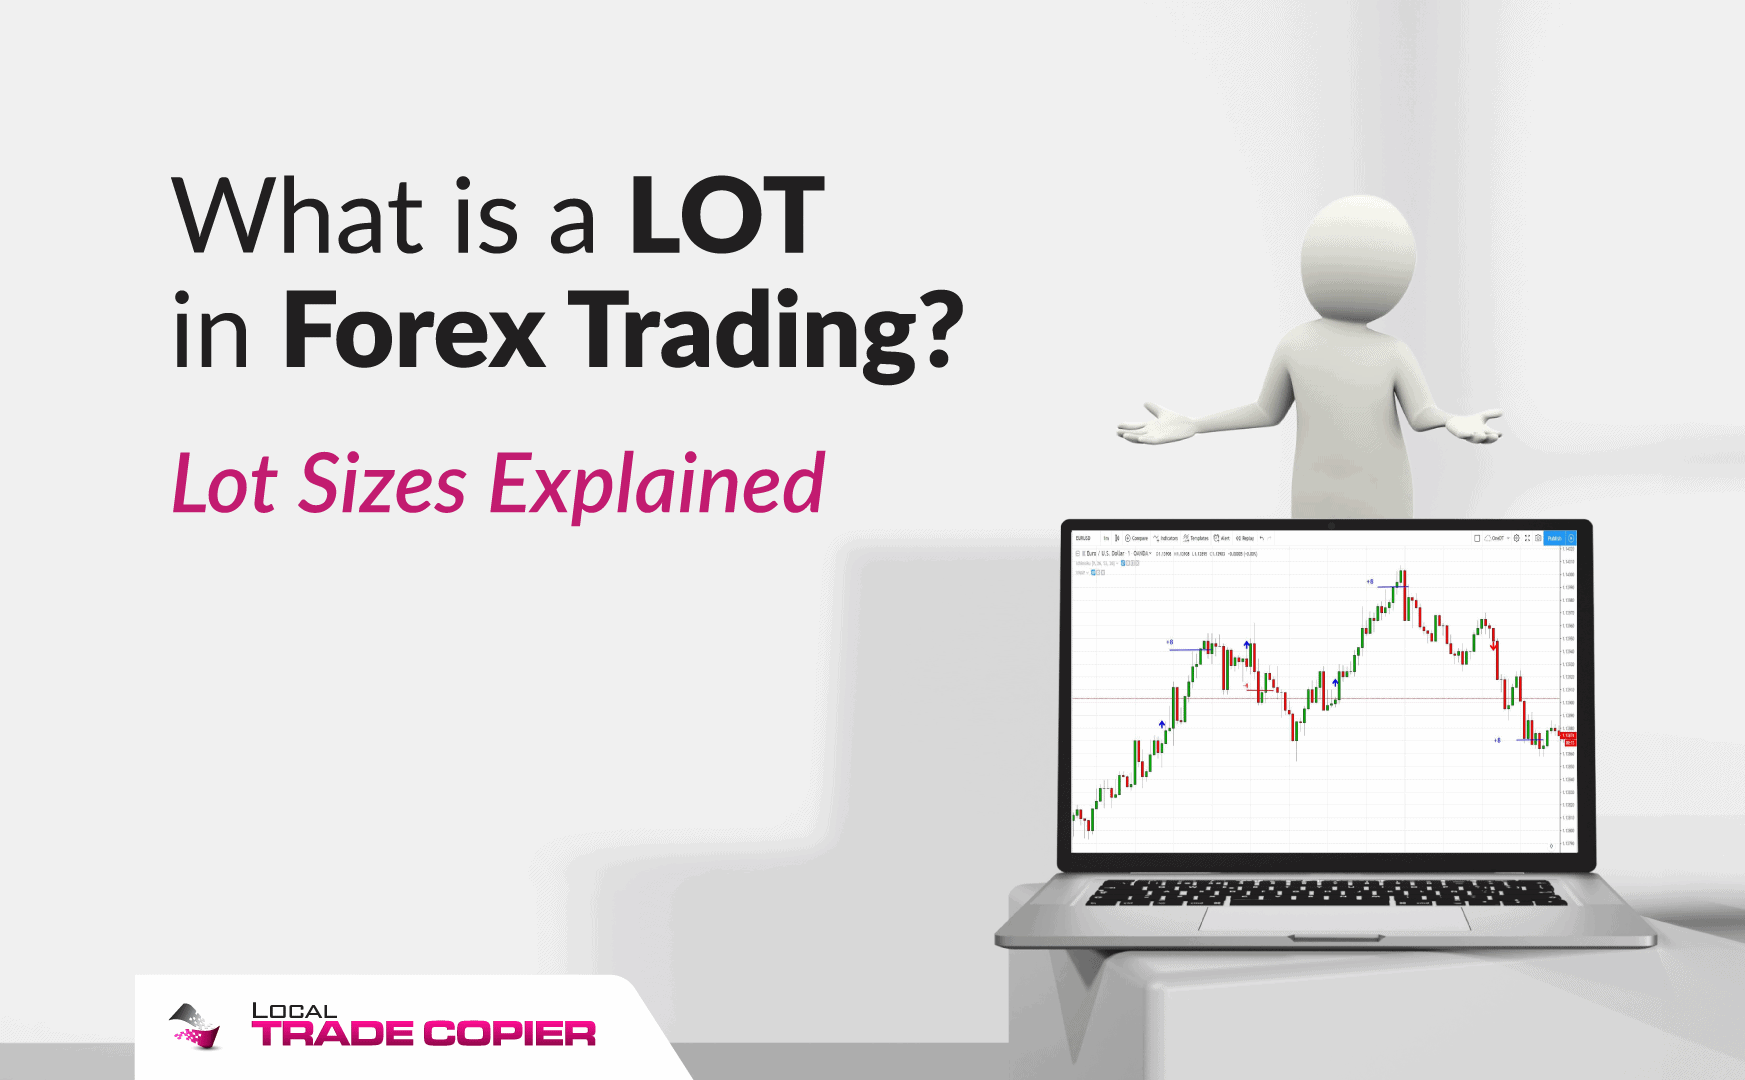 LOT in Forex Trading